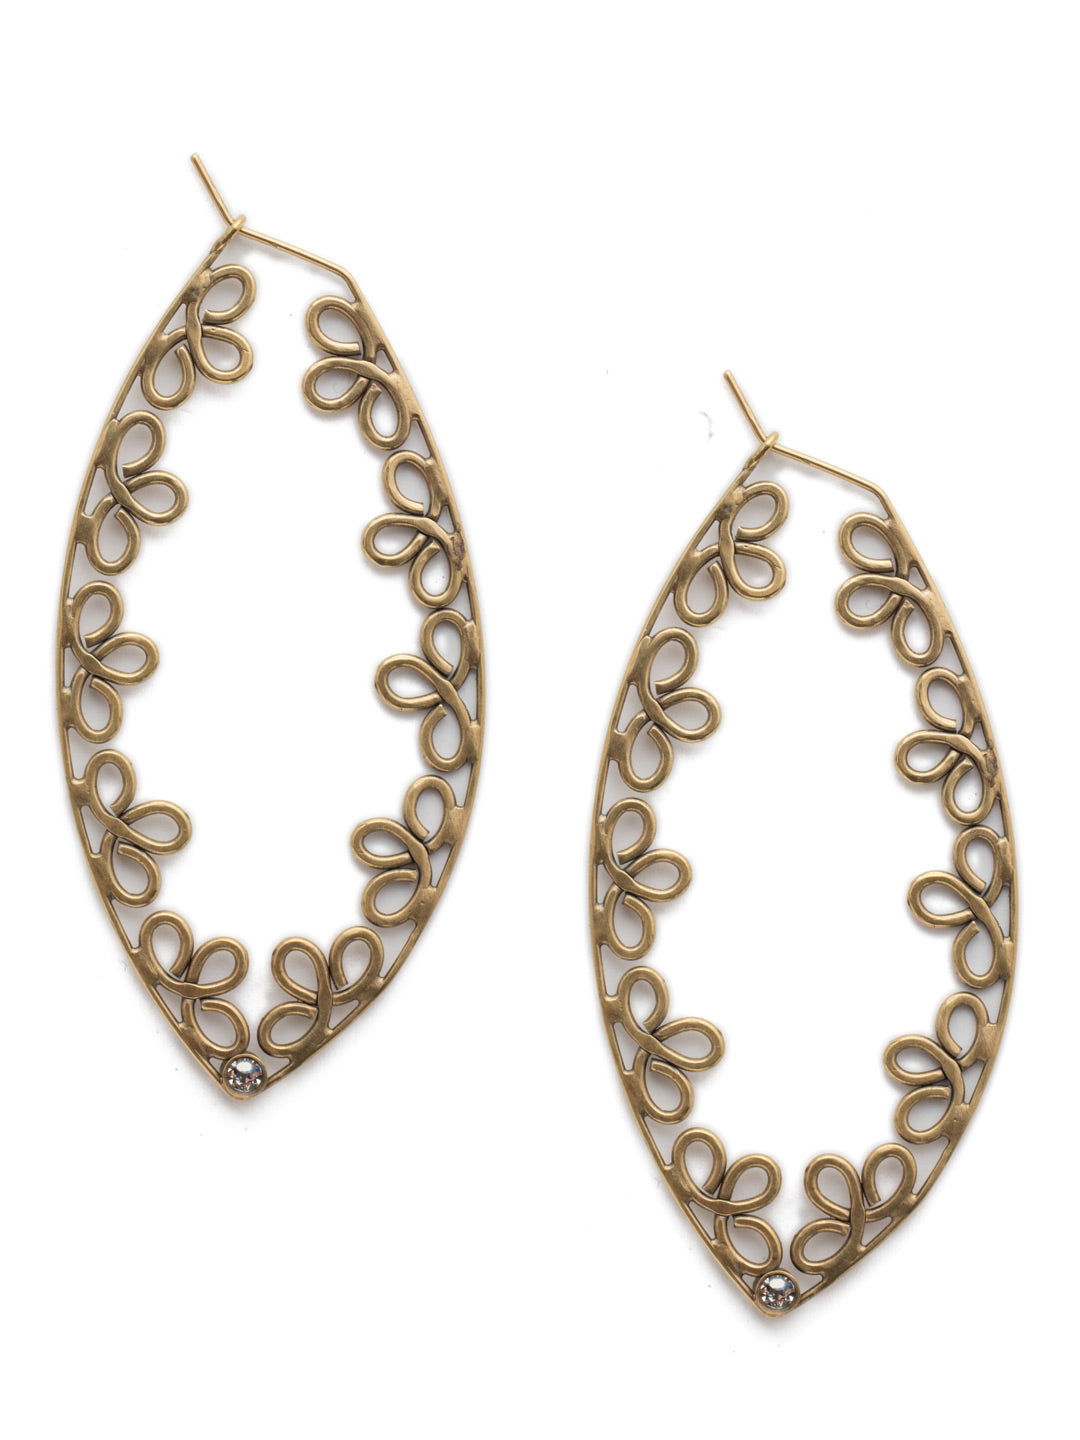 Yolanda Hoop Earrings - 4EES93AGCRY - <p>The Yolanda Hoop Earring is long on bold metallic style. Hand-soldered metal details lines the pair with just a dot of sparkly crystal their base. From Sorrelli's Crystal collection in our Antique Gold-tone finish.</p>